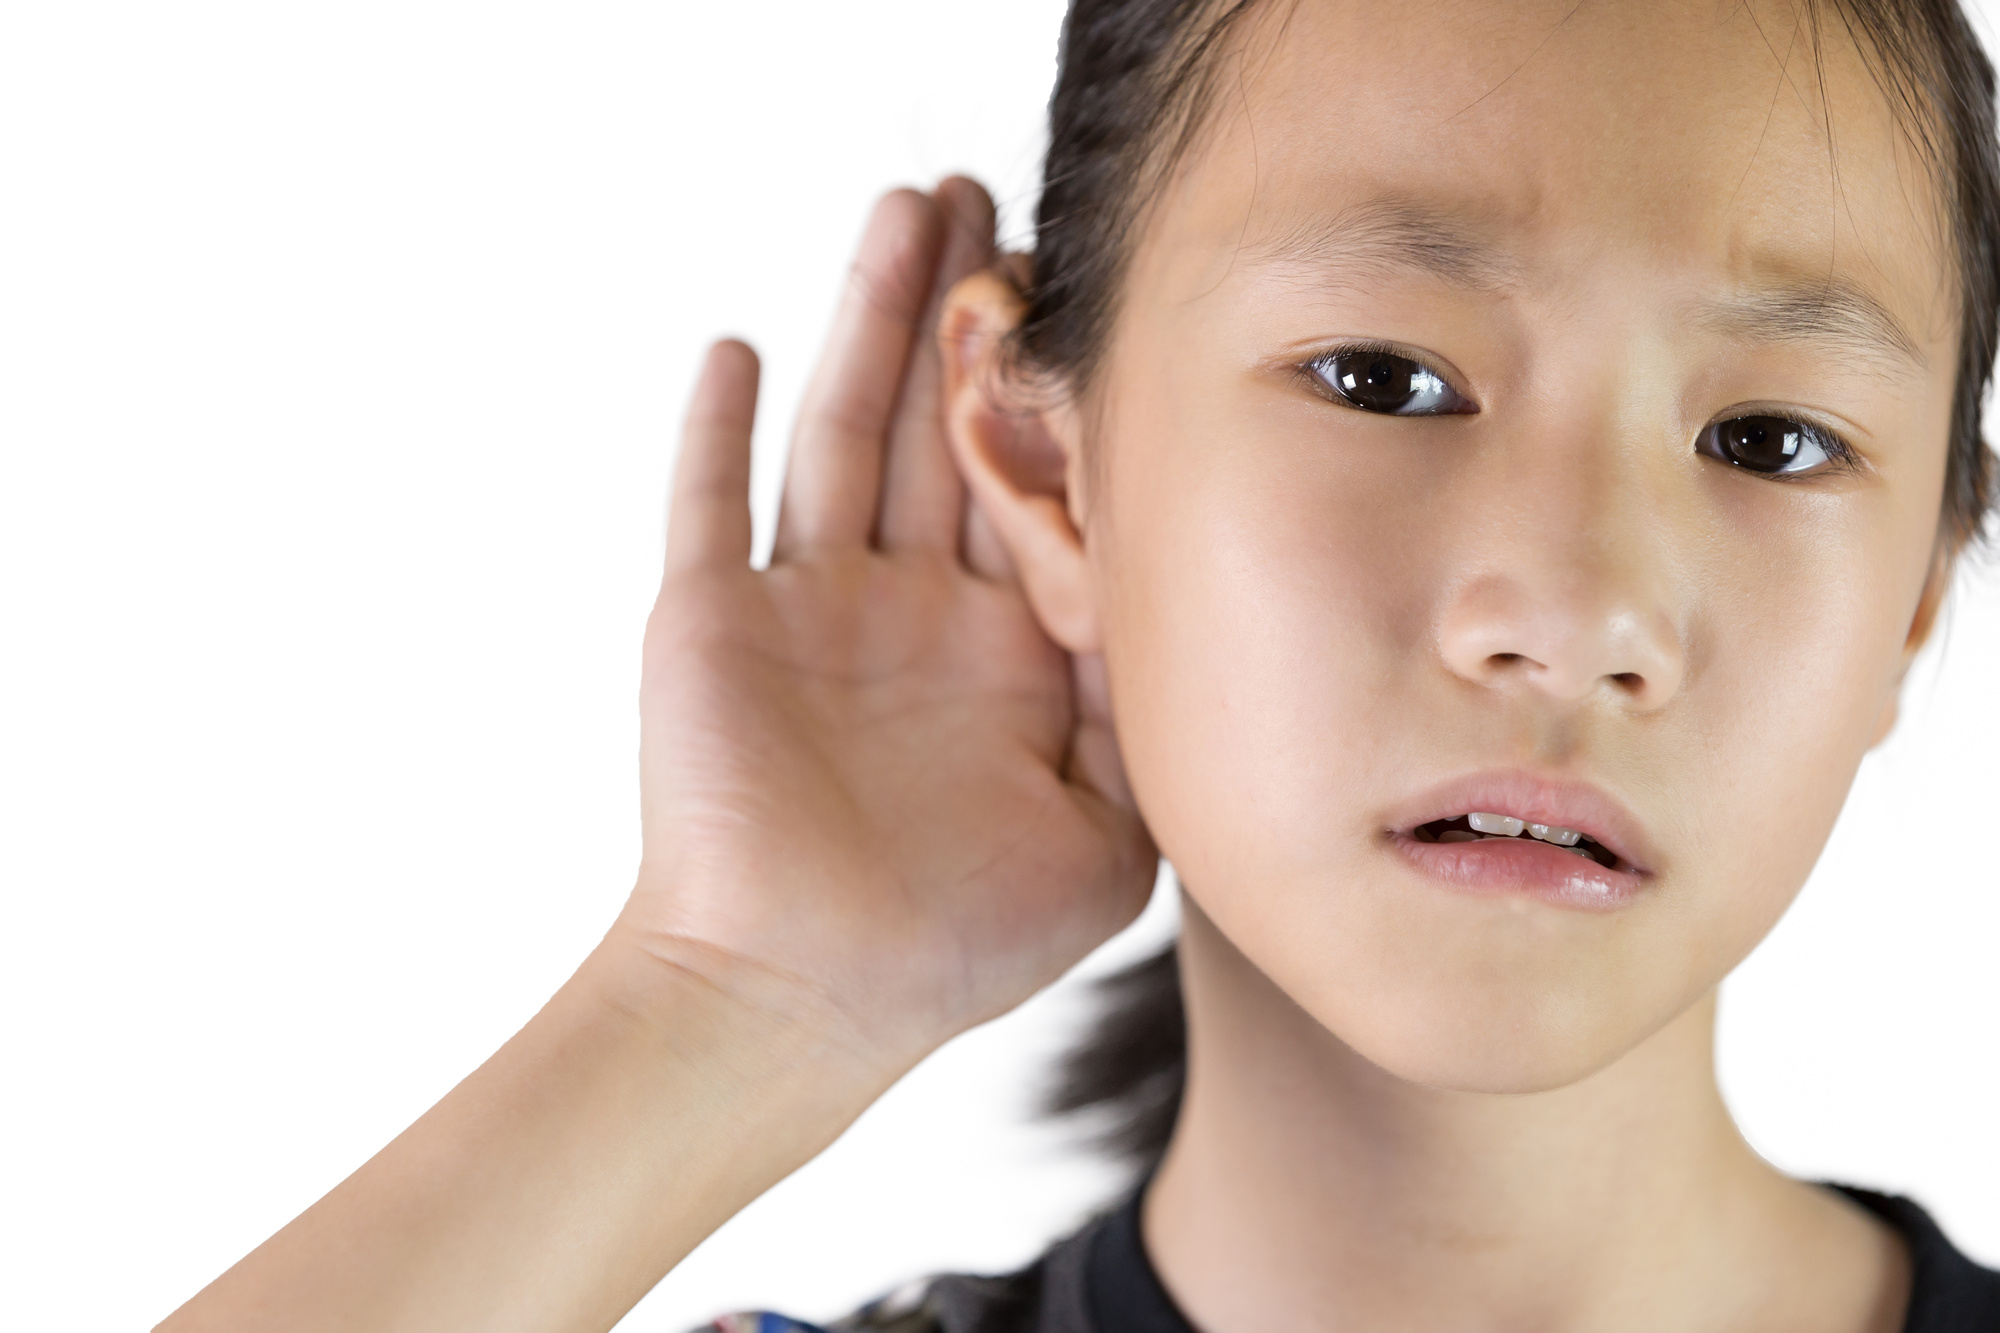 Is My Hearing OK? When and How Often to Have a Hearing Test